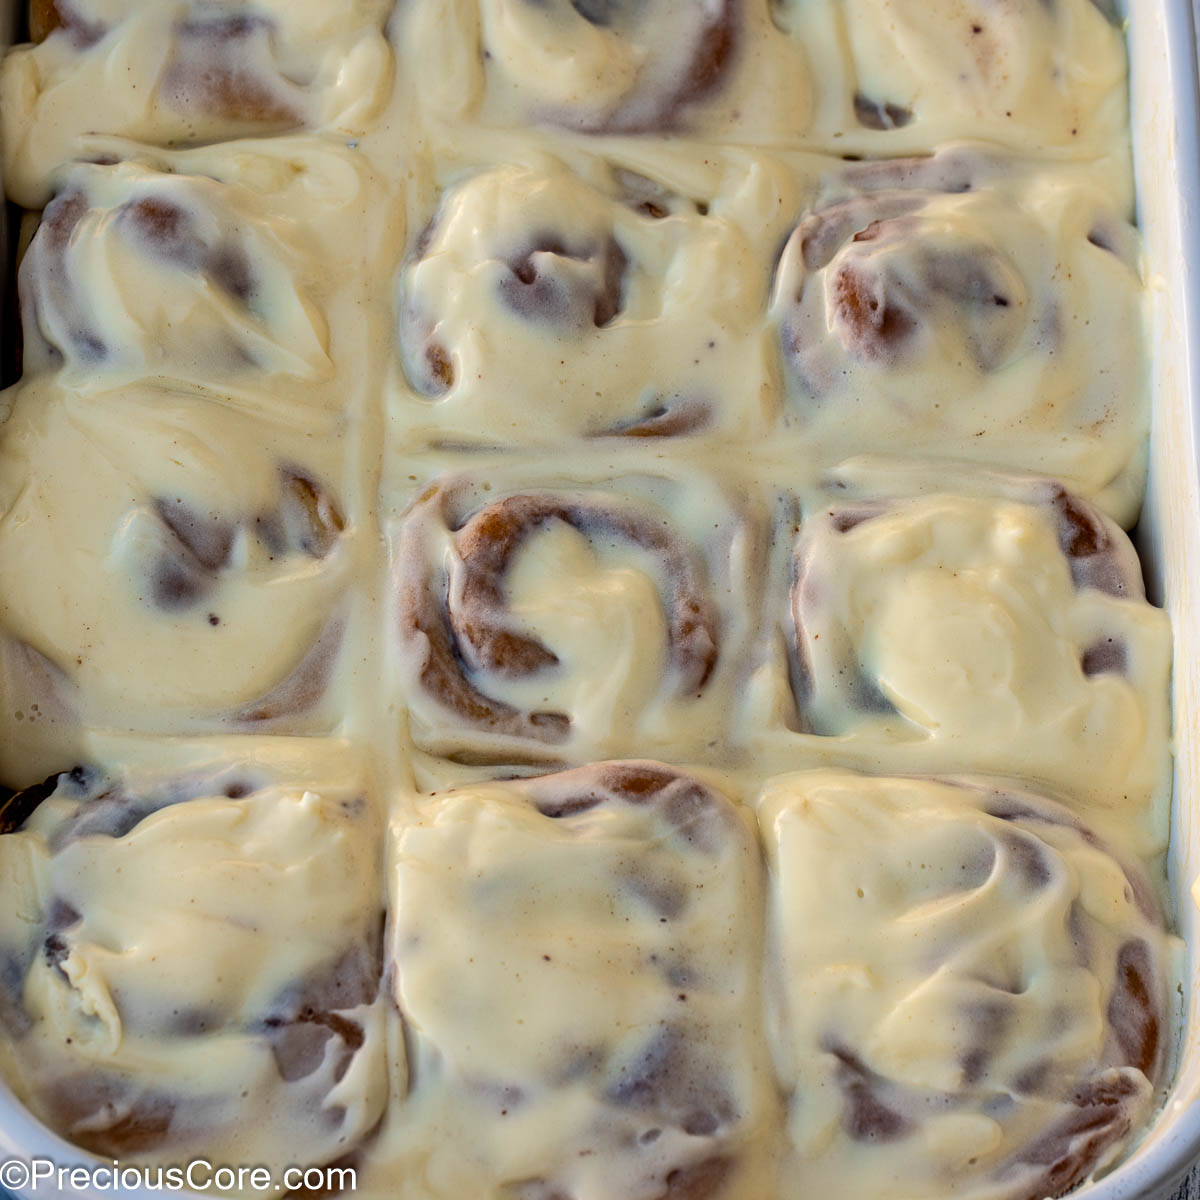 Square image of cinnamon rolls with cream cheese frosting.